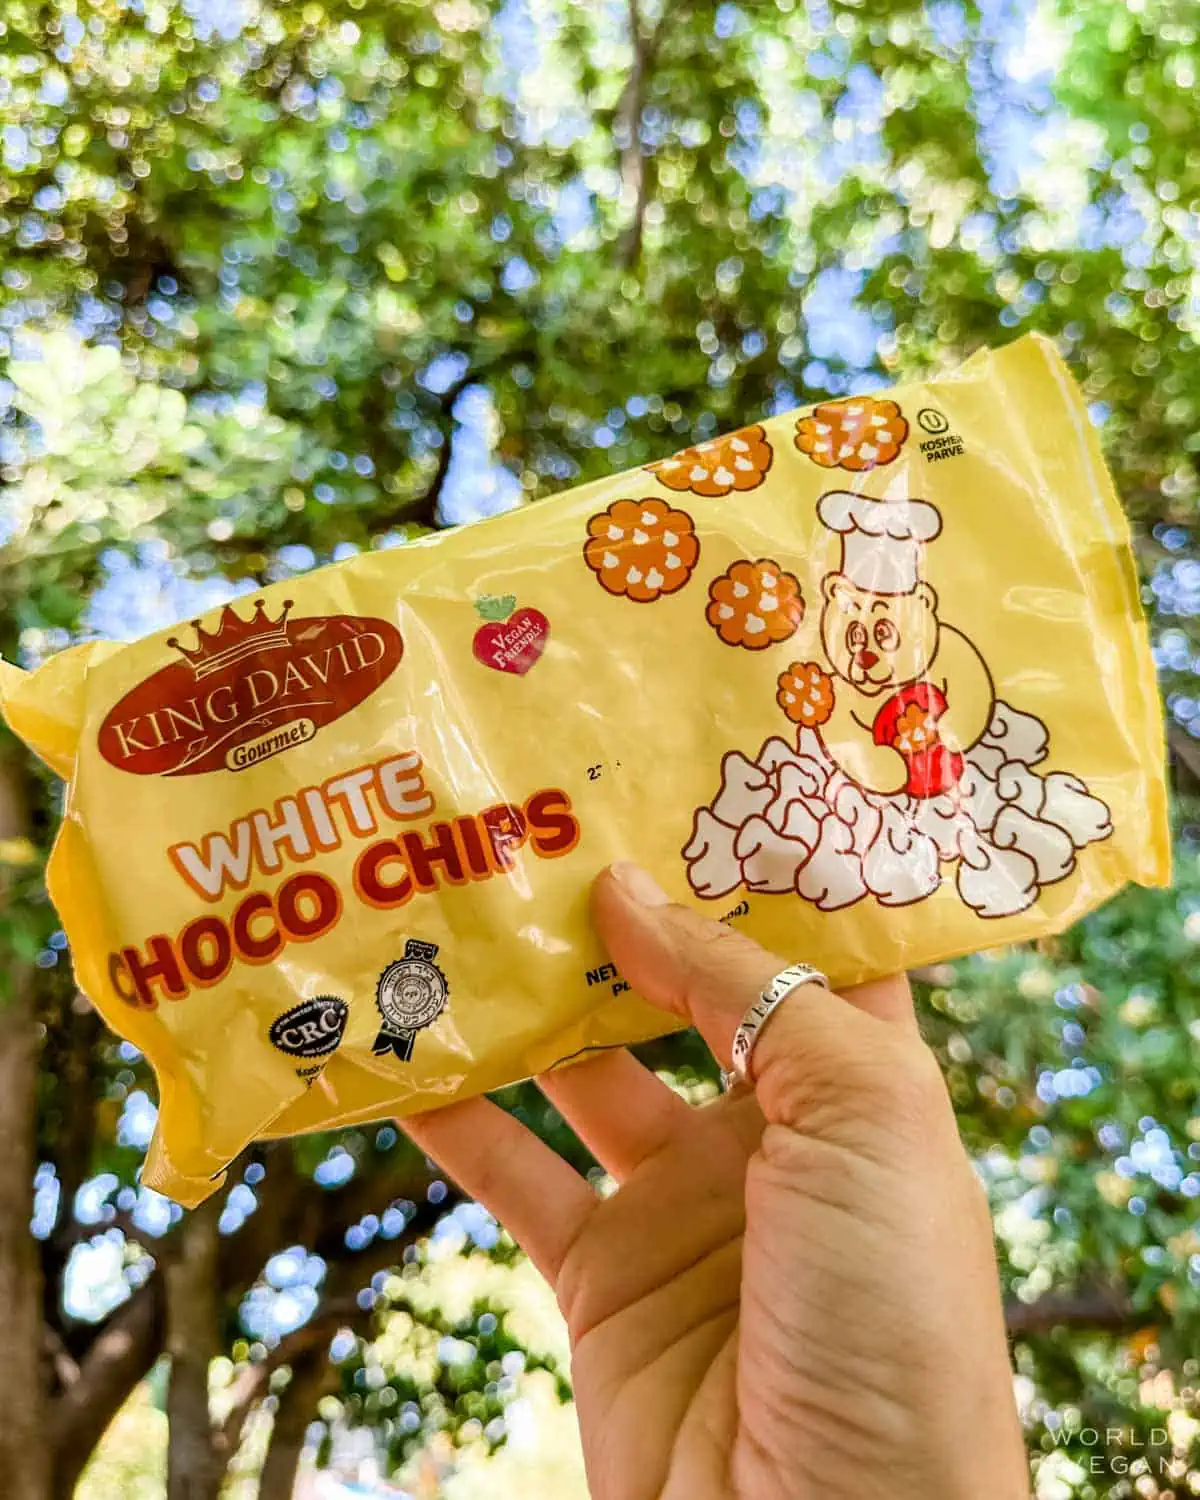 A hand holding up a bag of King David's vegan white chocolate chips.